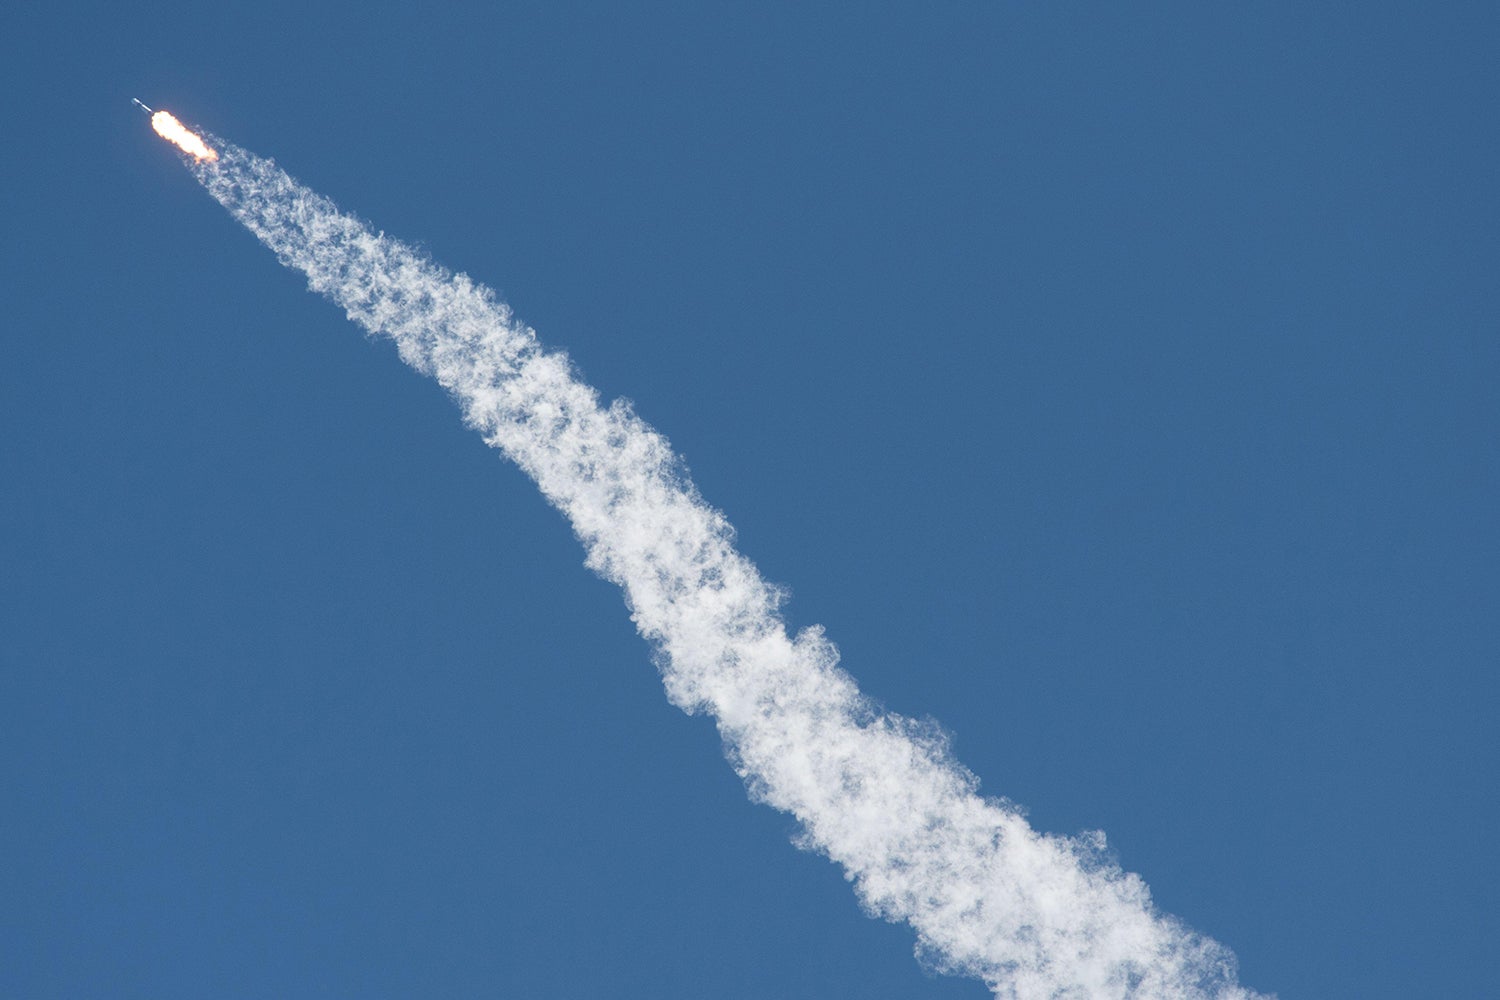 SpaceX Falcon rocket with smoky trail